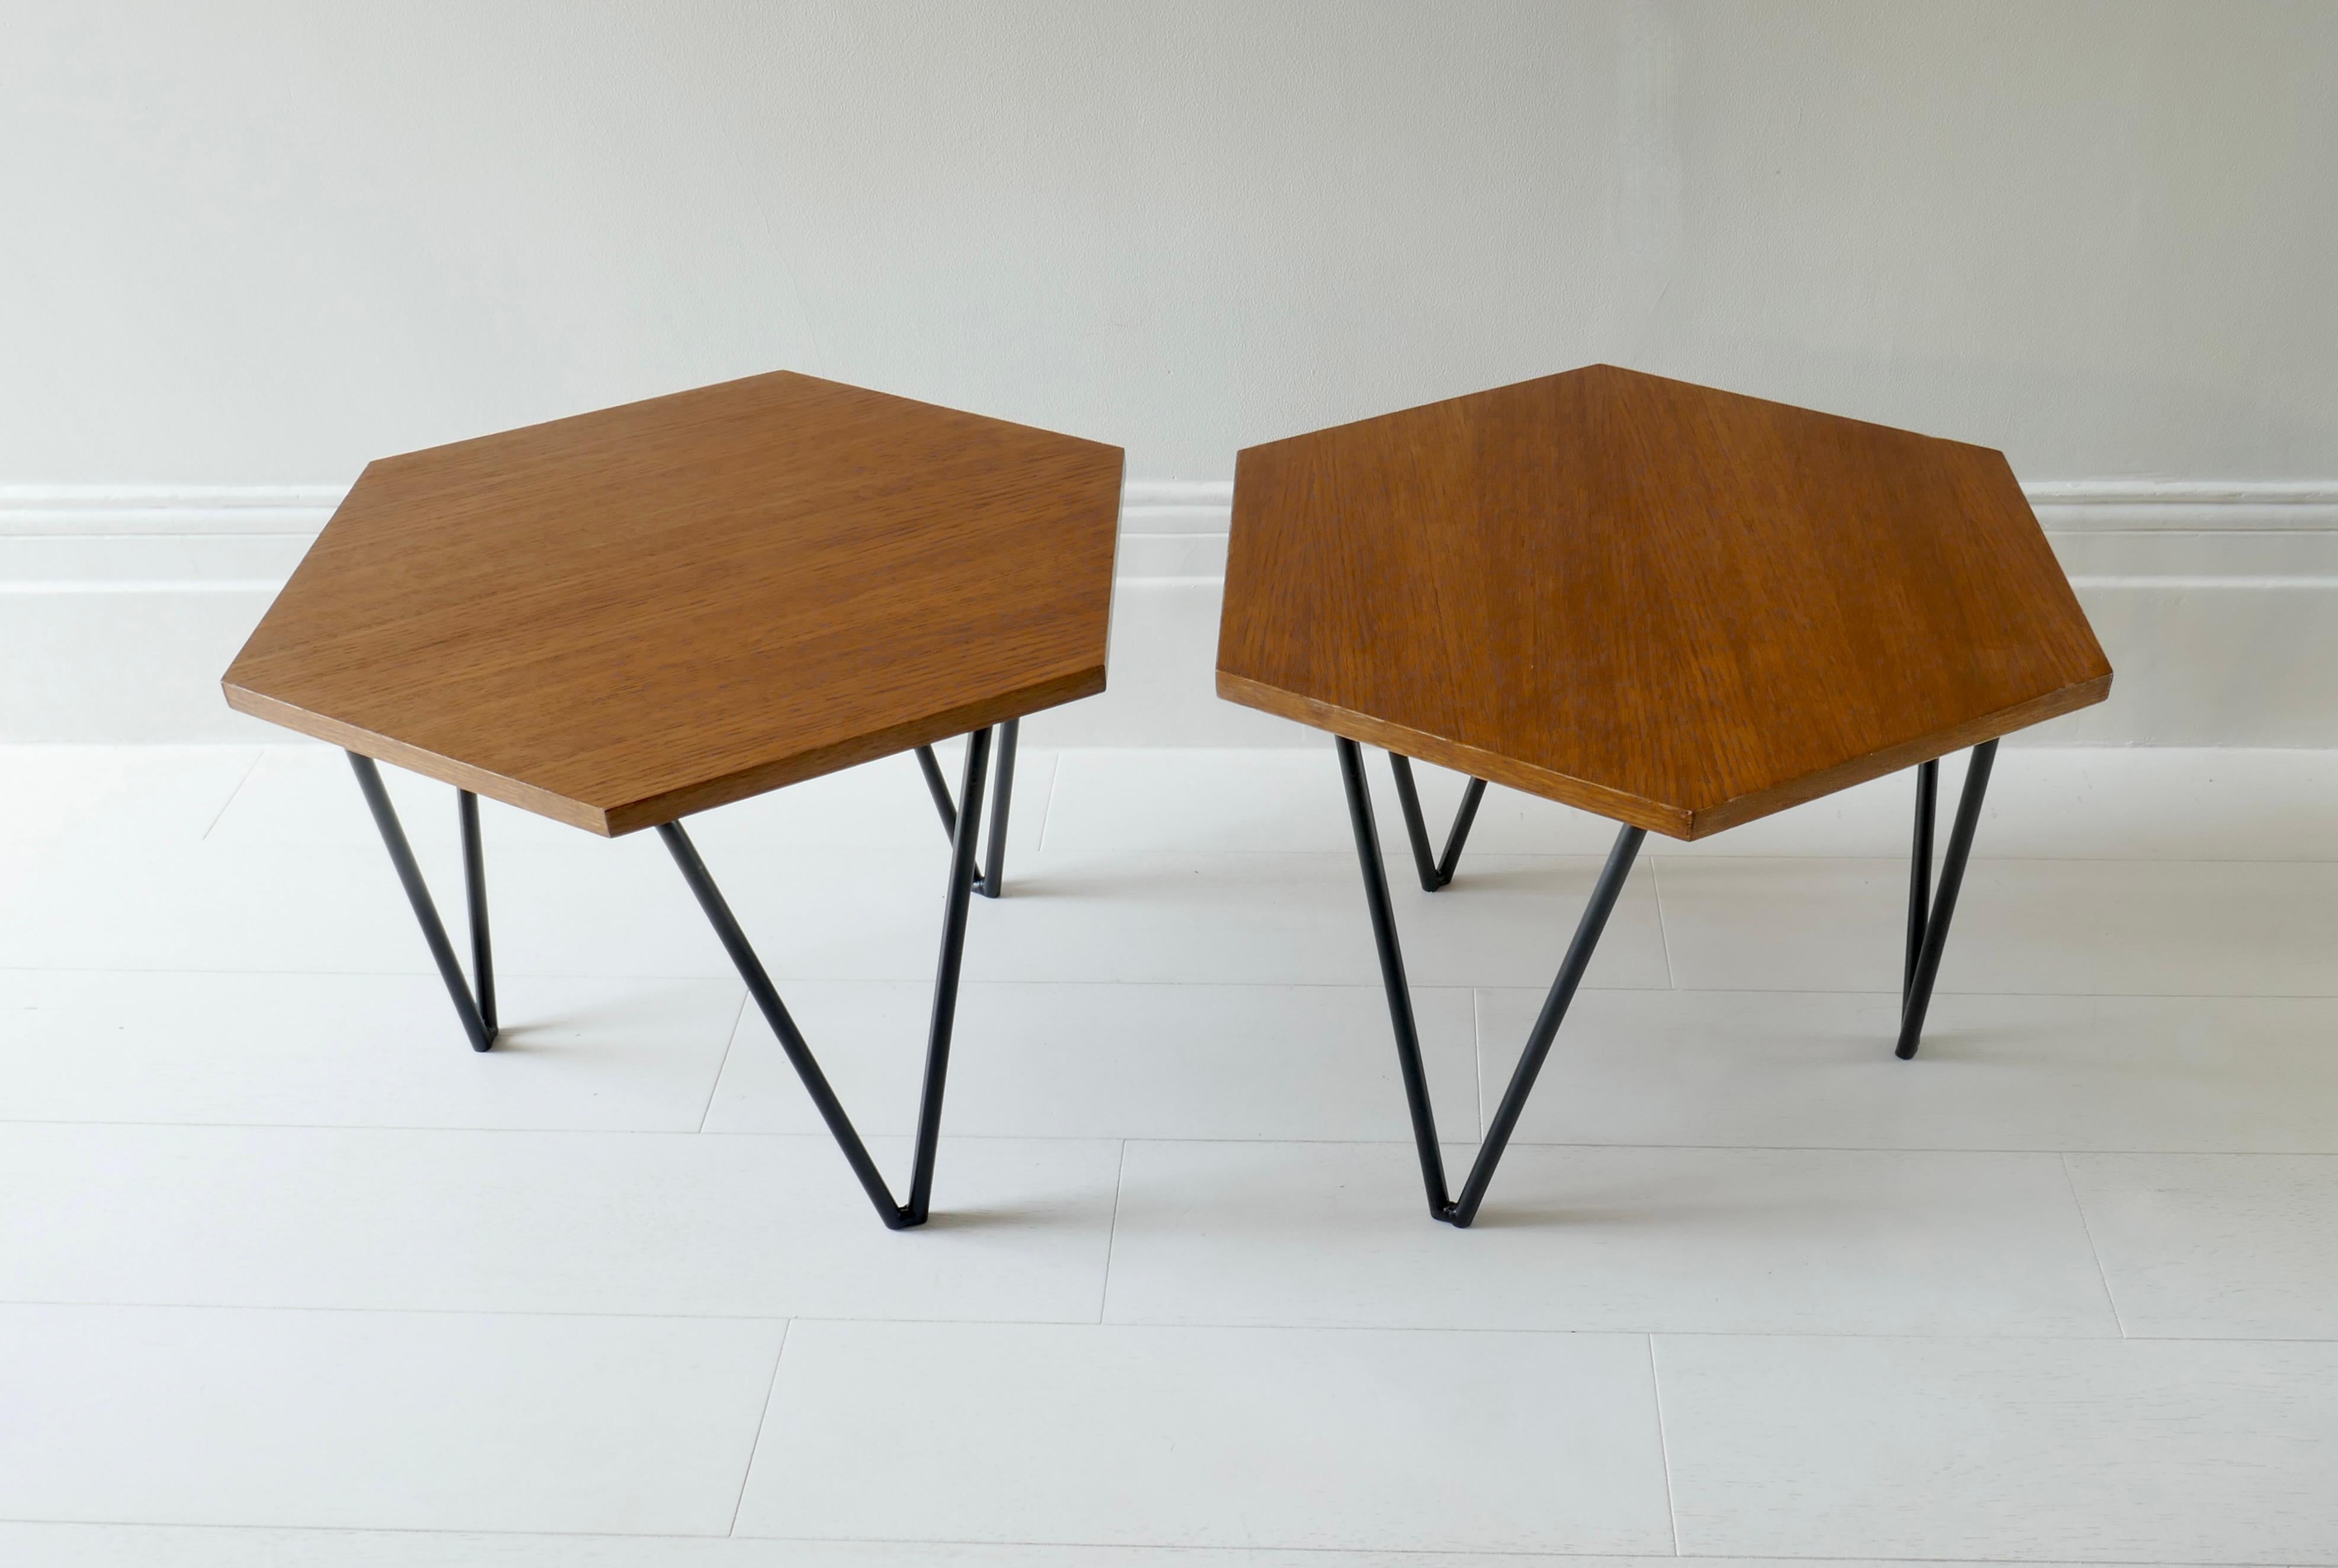 Set of 2 Hexagonal Gio Ponti Low Tables by Isa Bergamo, Italy, 1950s For Sale 3